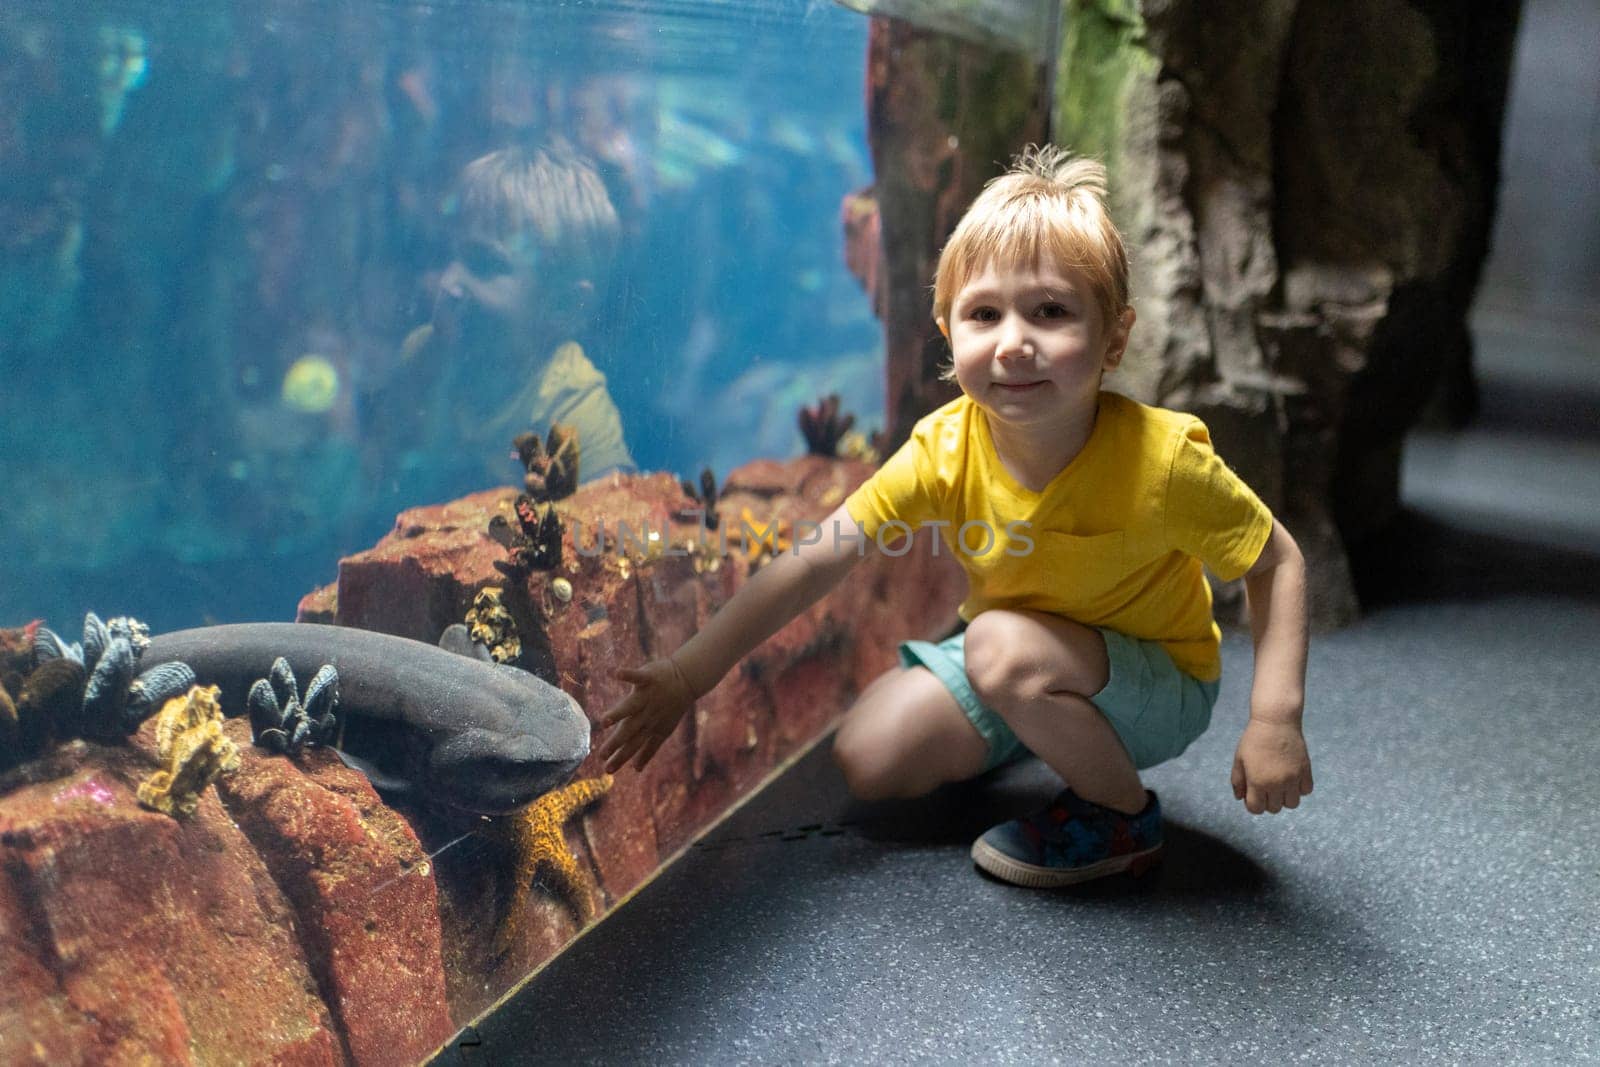 A young boy is kneeling in front of a fish tank - large aquarium, reaching out to touch a sea star